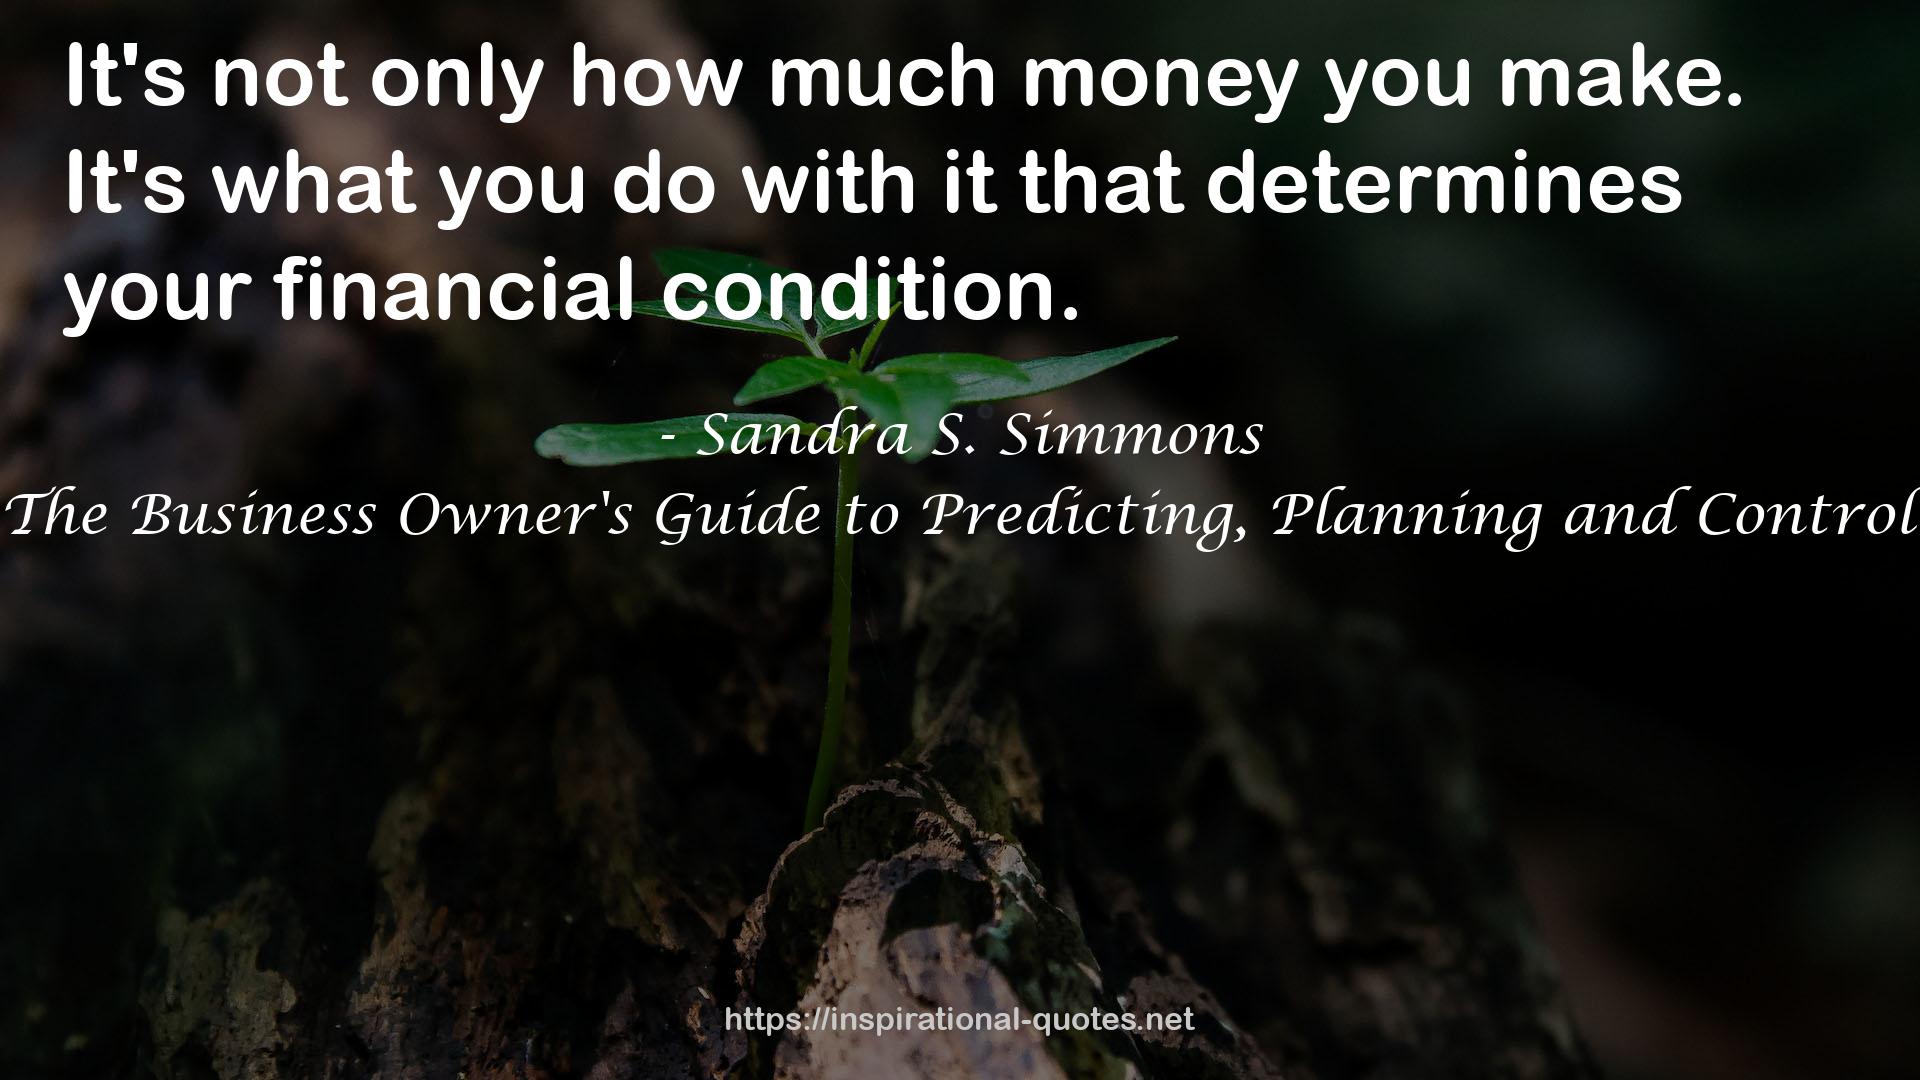 Unleash Your Cash Flow Mojo: The Business Owner's Guide to Predicting, Planning and Controlling Your Company's Cash Flow QUOTES